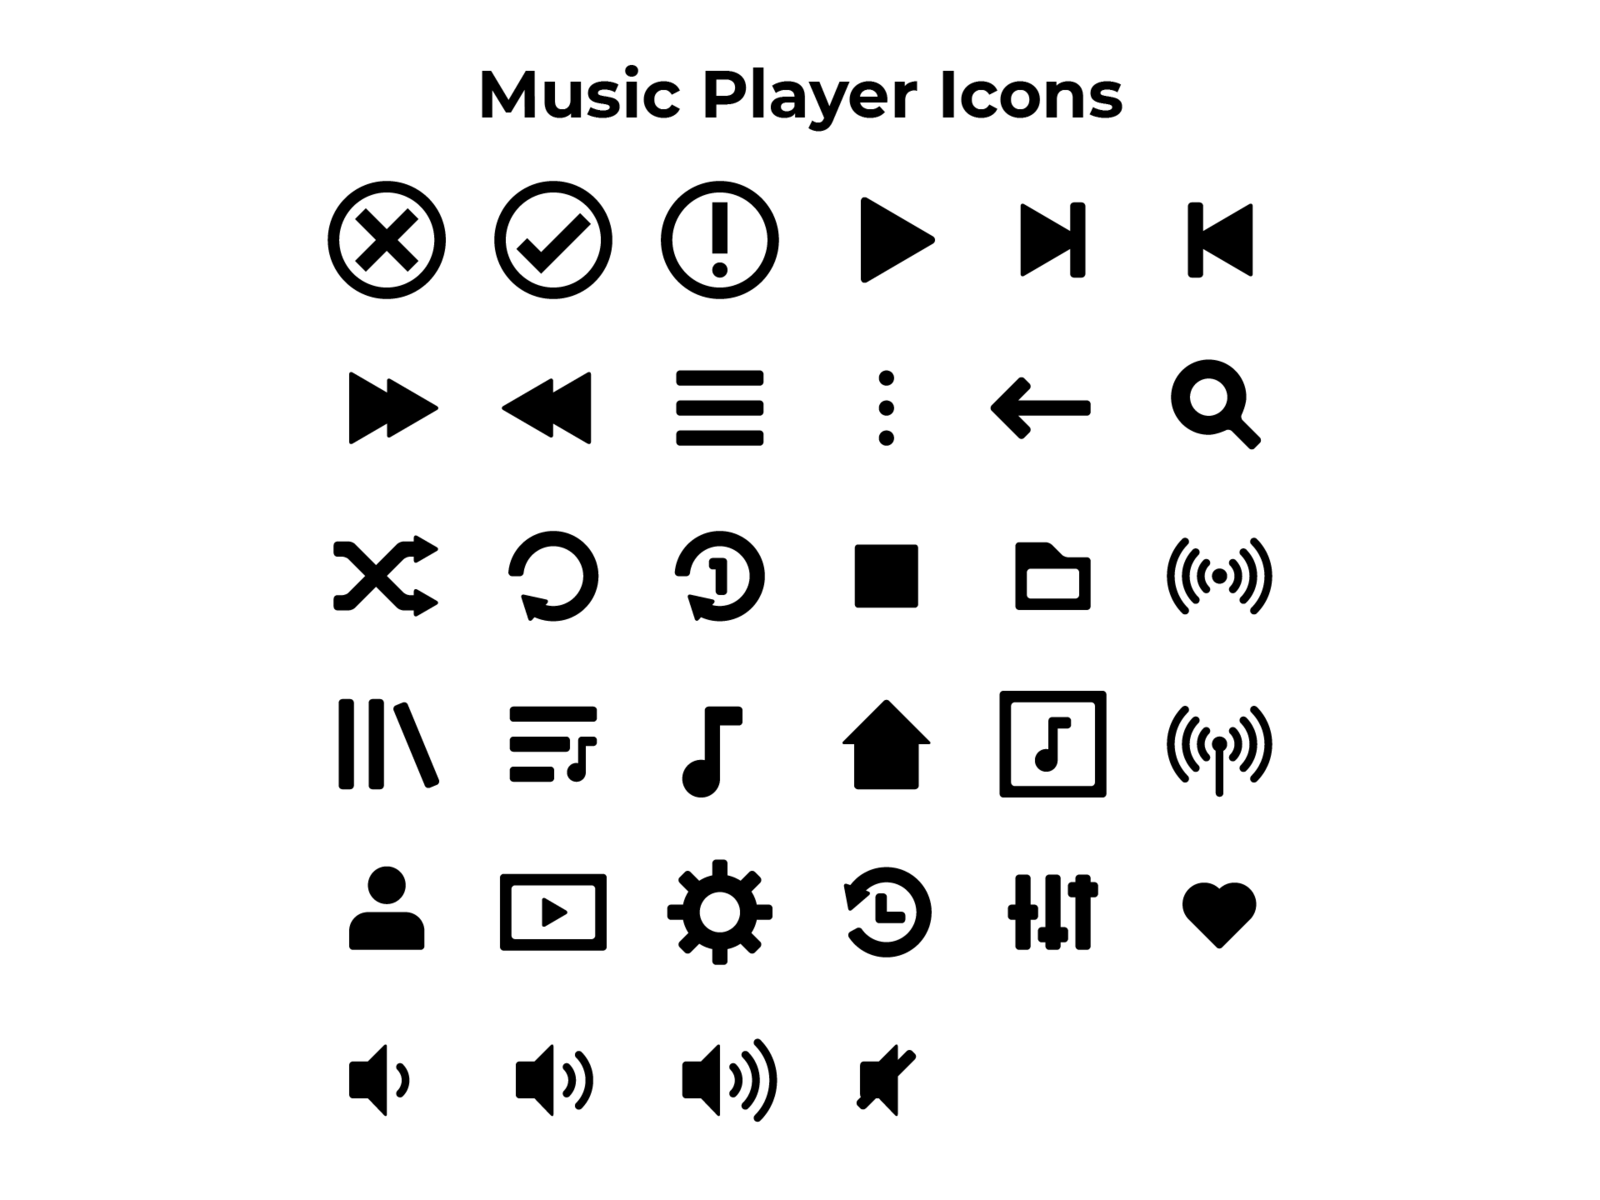 Music Player Icons by Cirquare on Dribbble